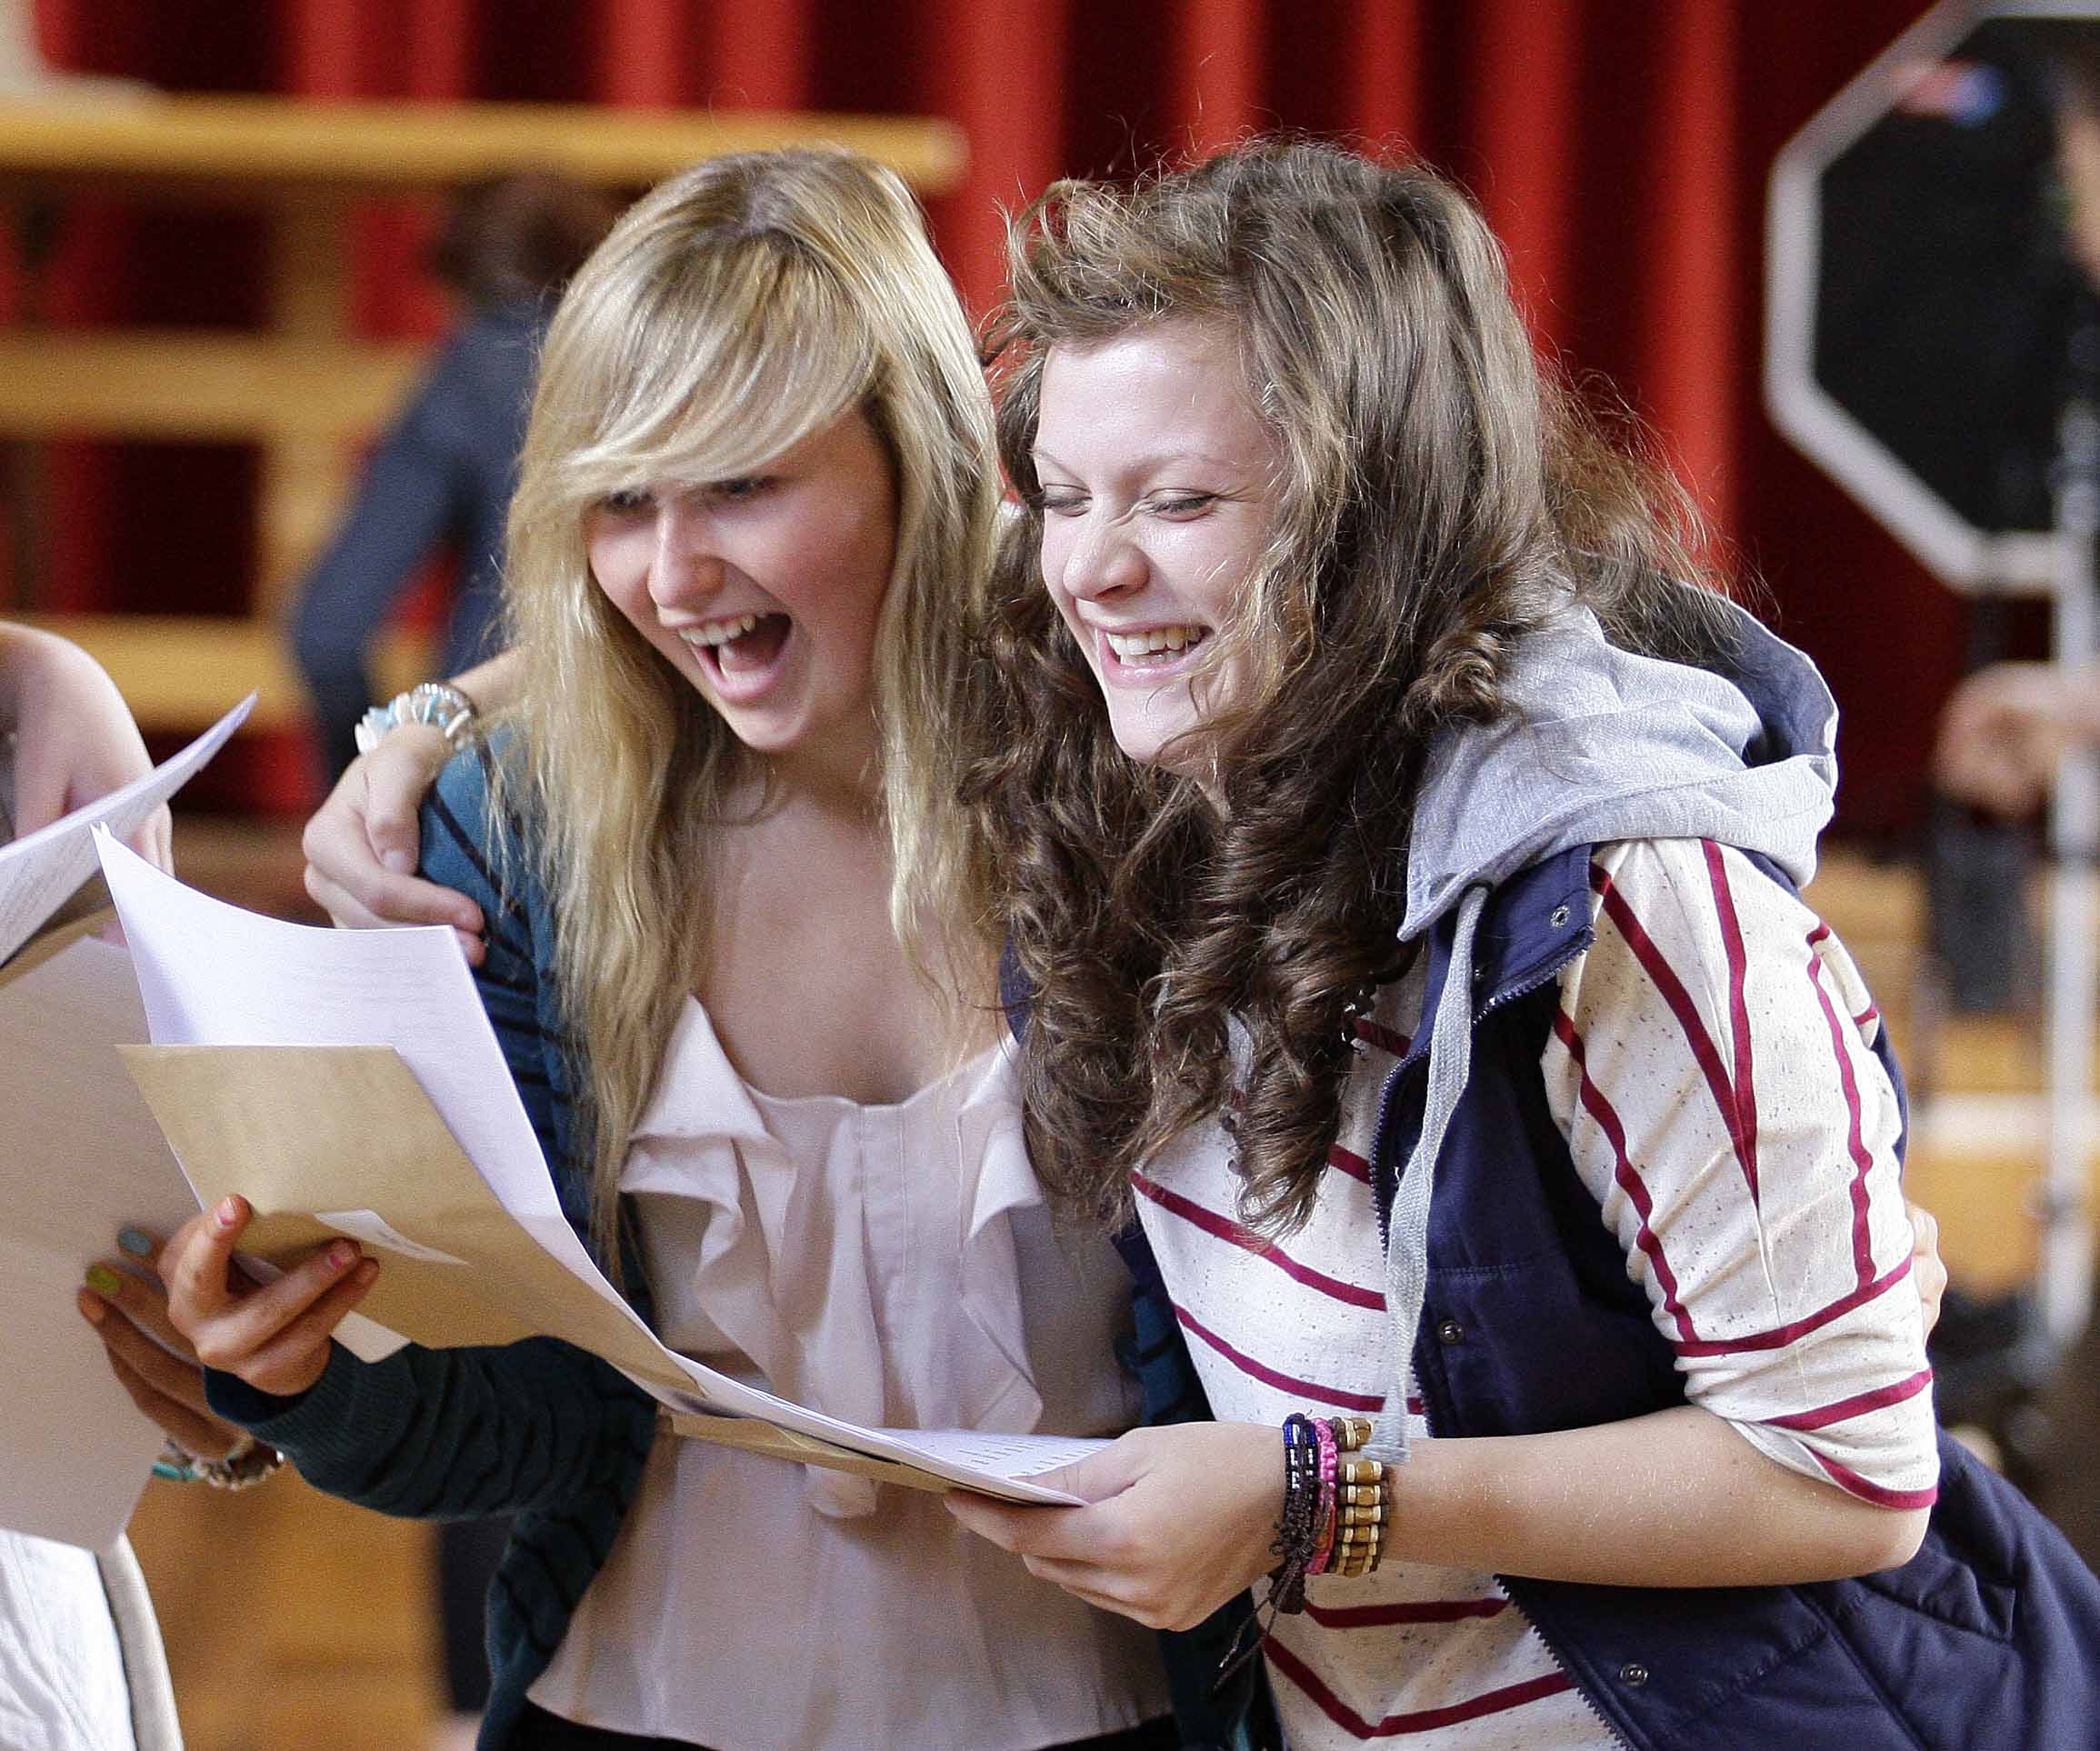 GCSE grades rise for 23rd year in a row